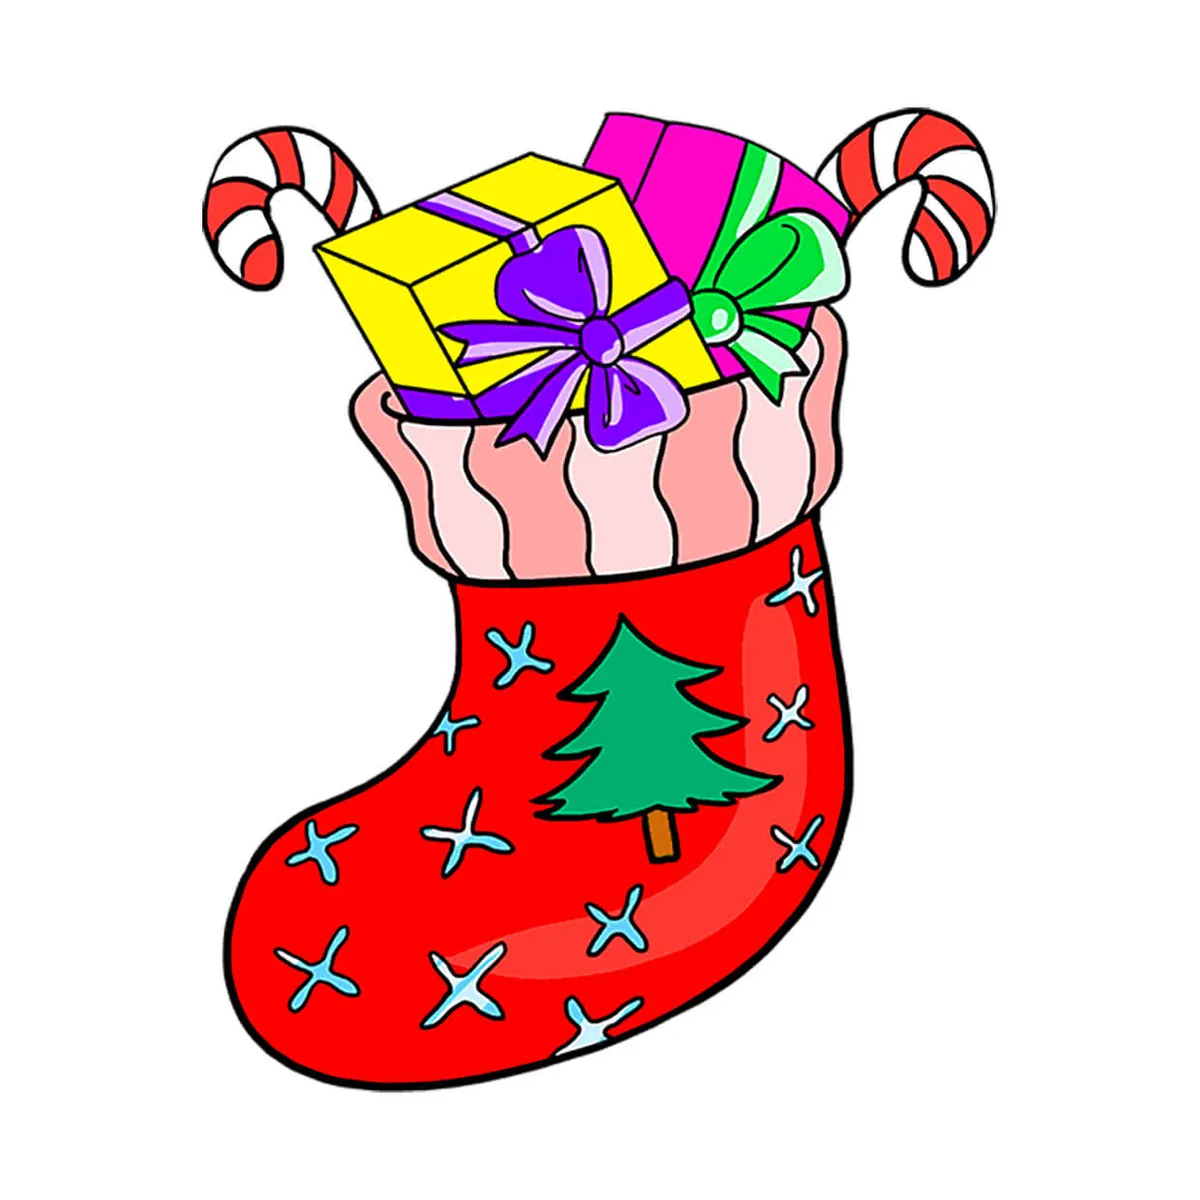 26 Christmas stocking clipart pages for easy craft & coloring fun for the  holidays, at